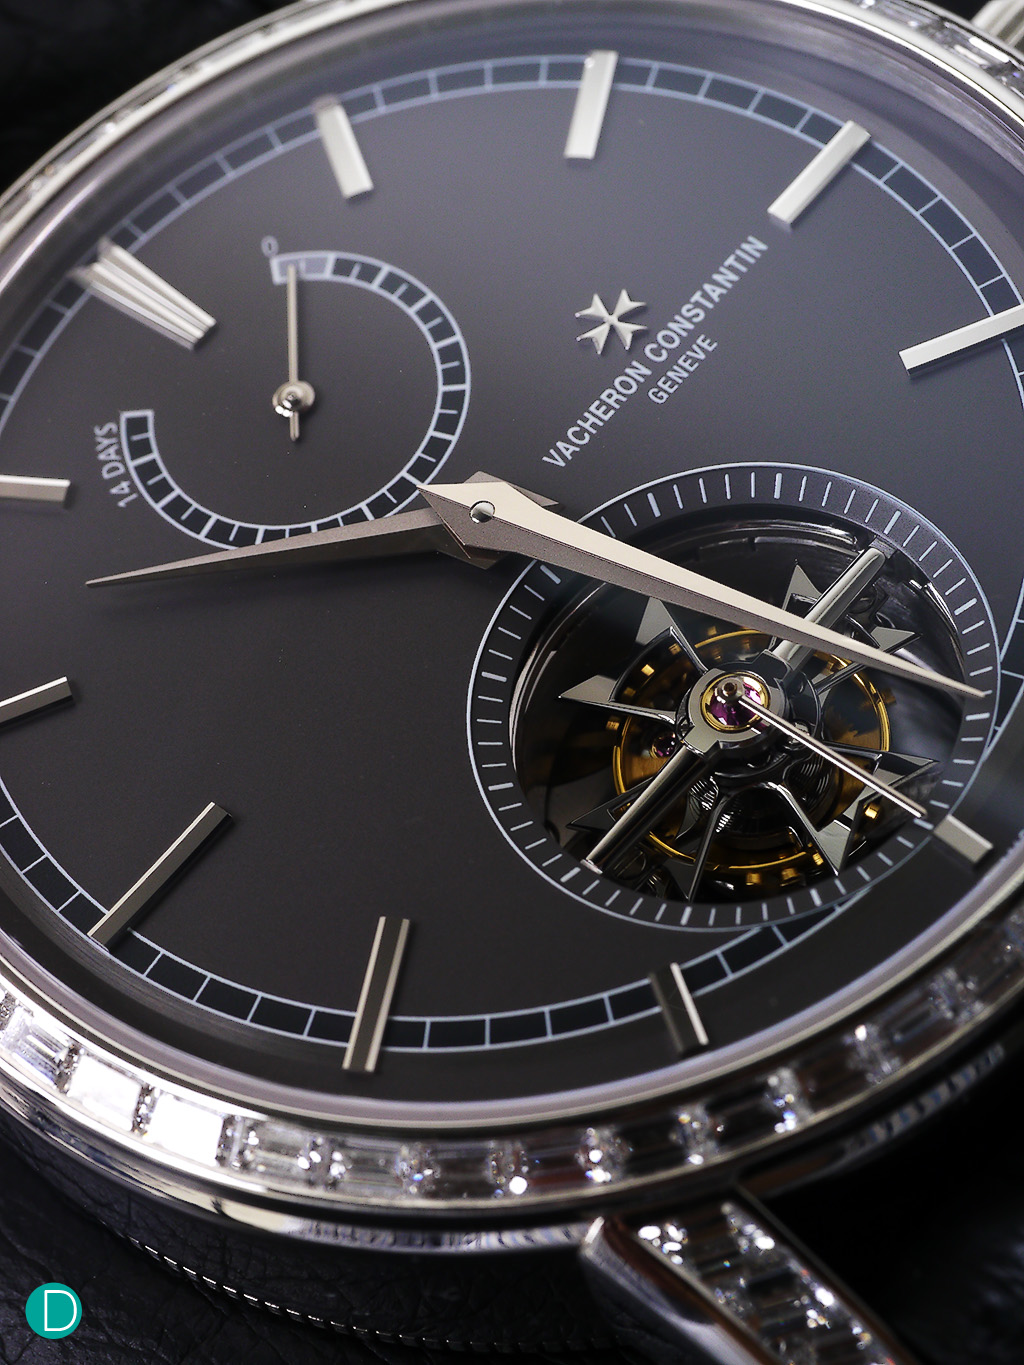 Cased in Platinum, this particular model 89600/000P-9878 has its bezel and lugs lined with baguette cut diamonds